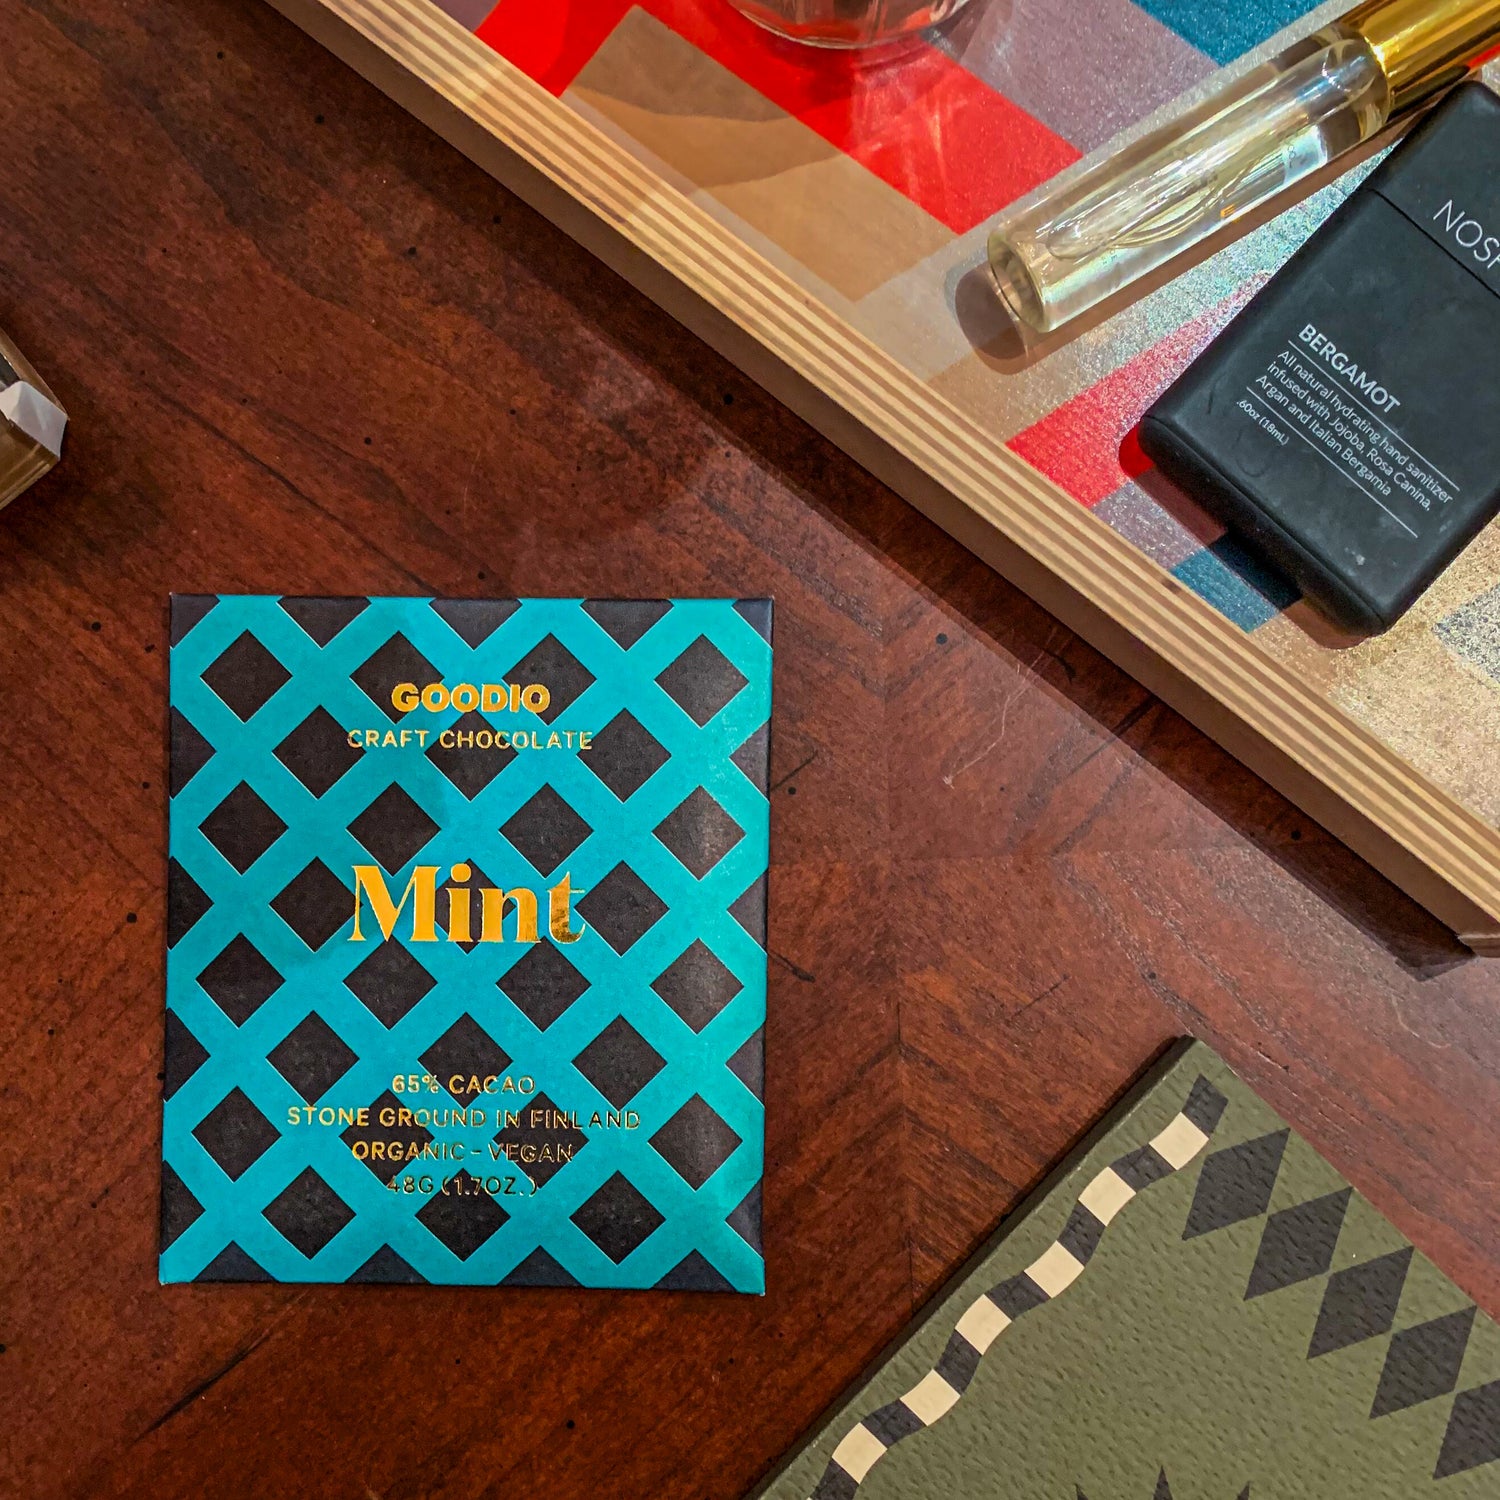 goodio chocolate mint packaging amongst other desk accessories. Packaging is a blue/green background with black diamond motif